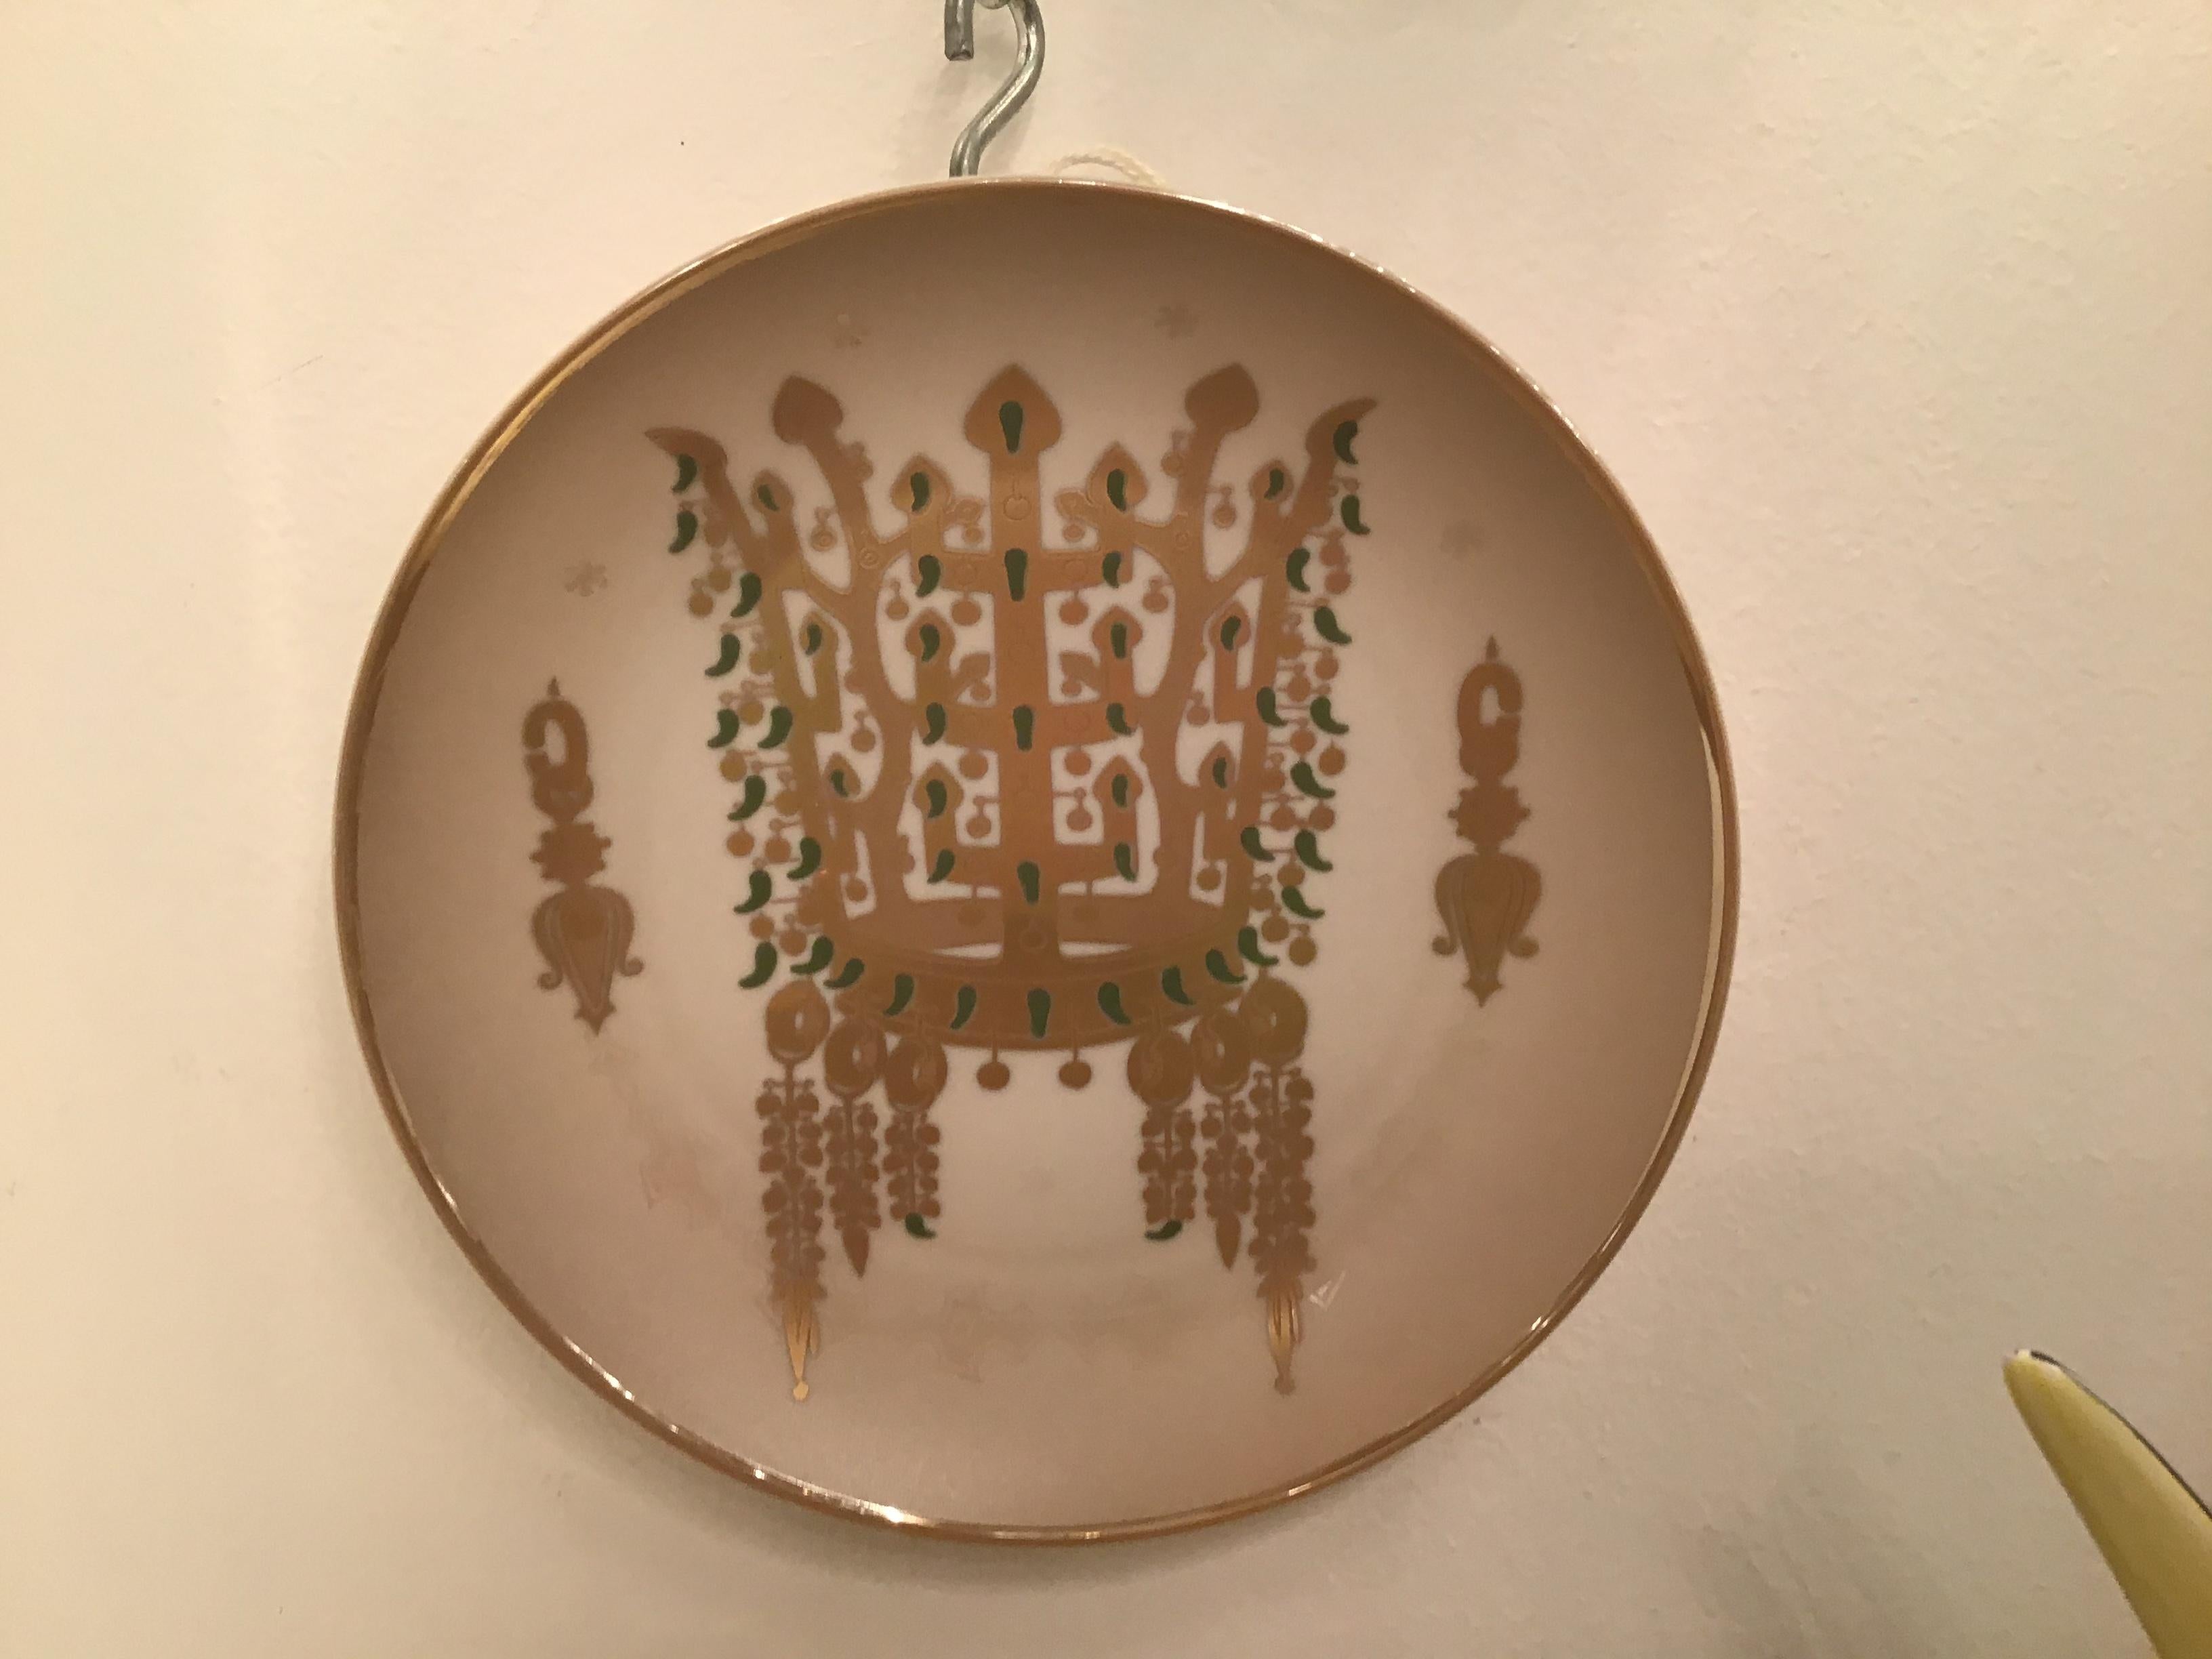 Morbelli Porcelain “Dinastia Silla” Wall Plates Worked with Pure Gold 1960 Italy For Sale 3